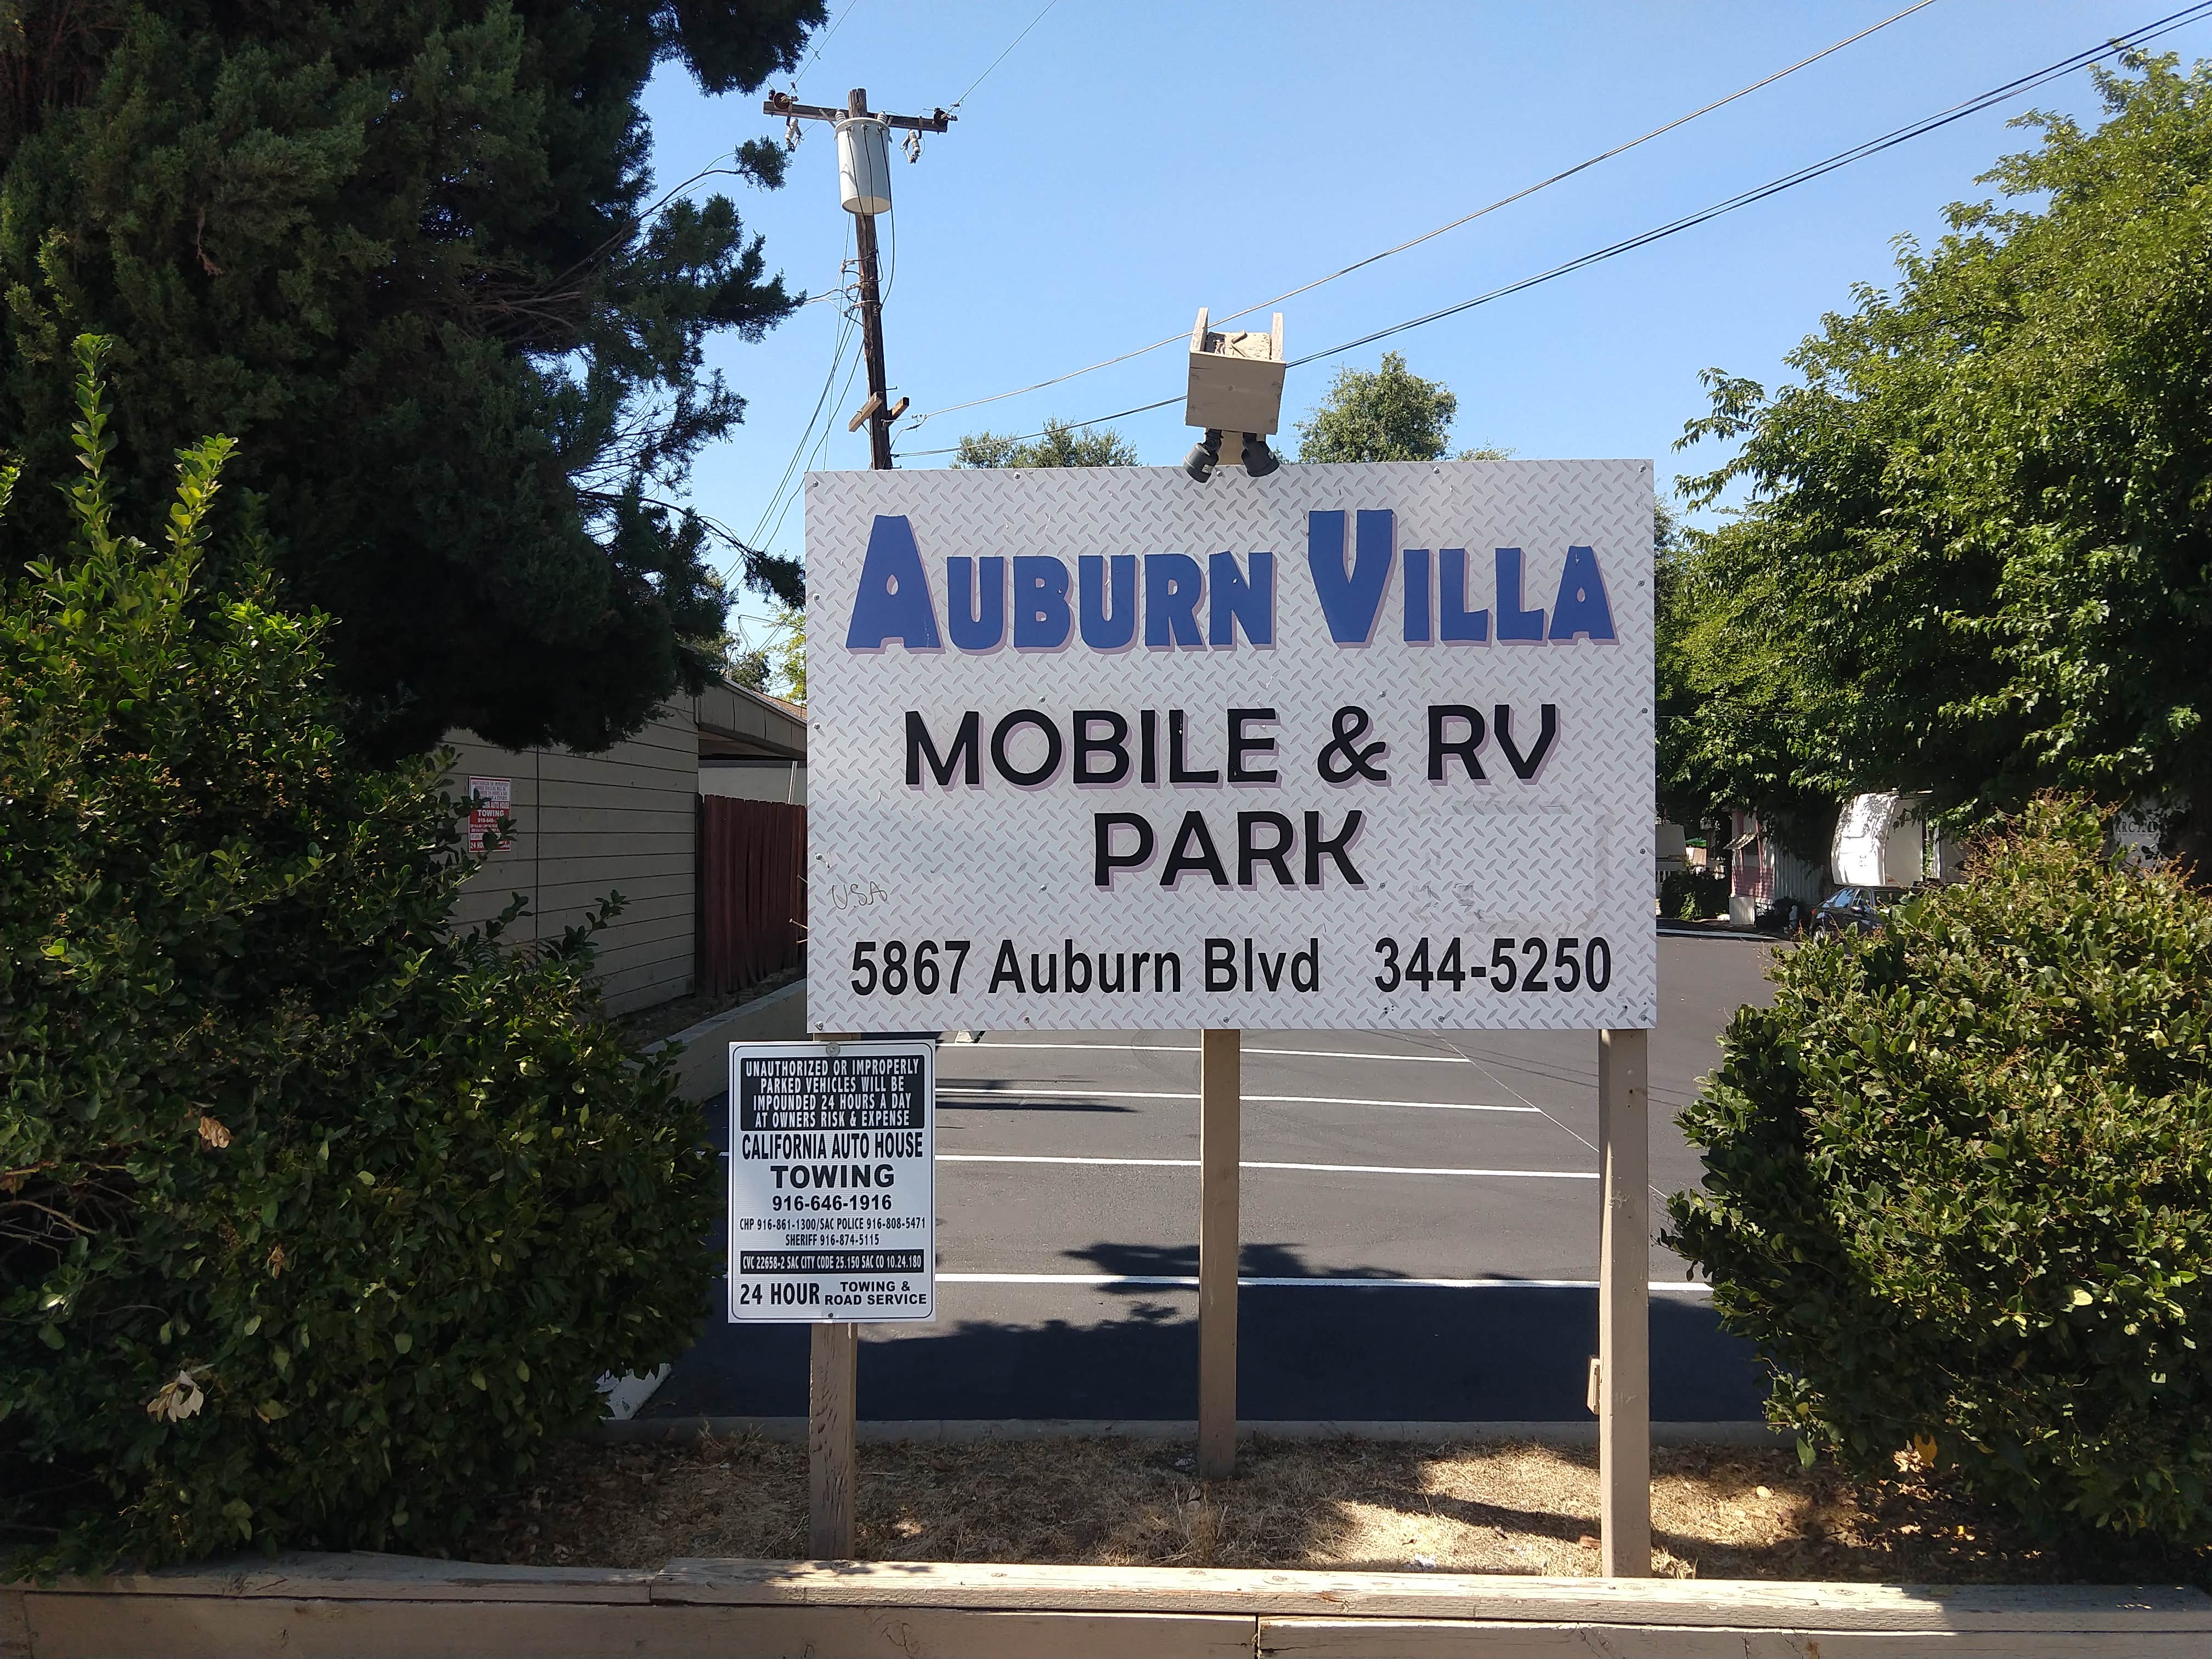 Camper submitted image from Auburn Villa Mobile Home & RV Park - 1